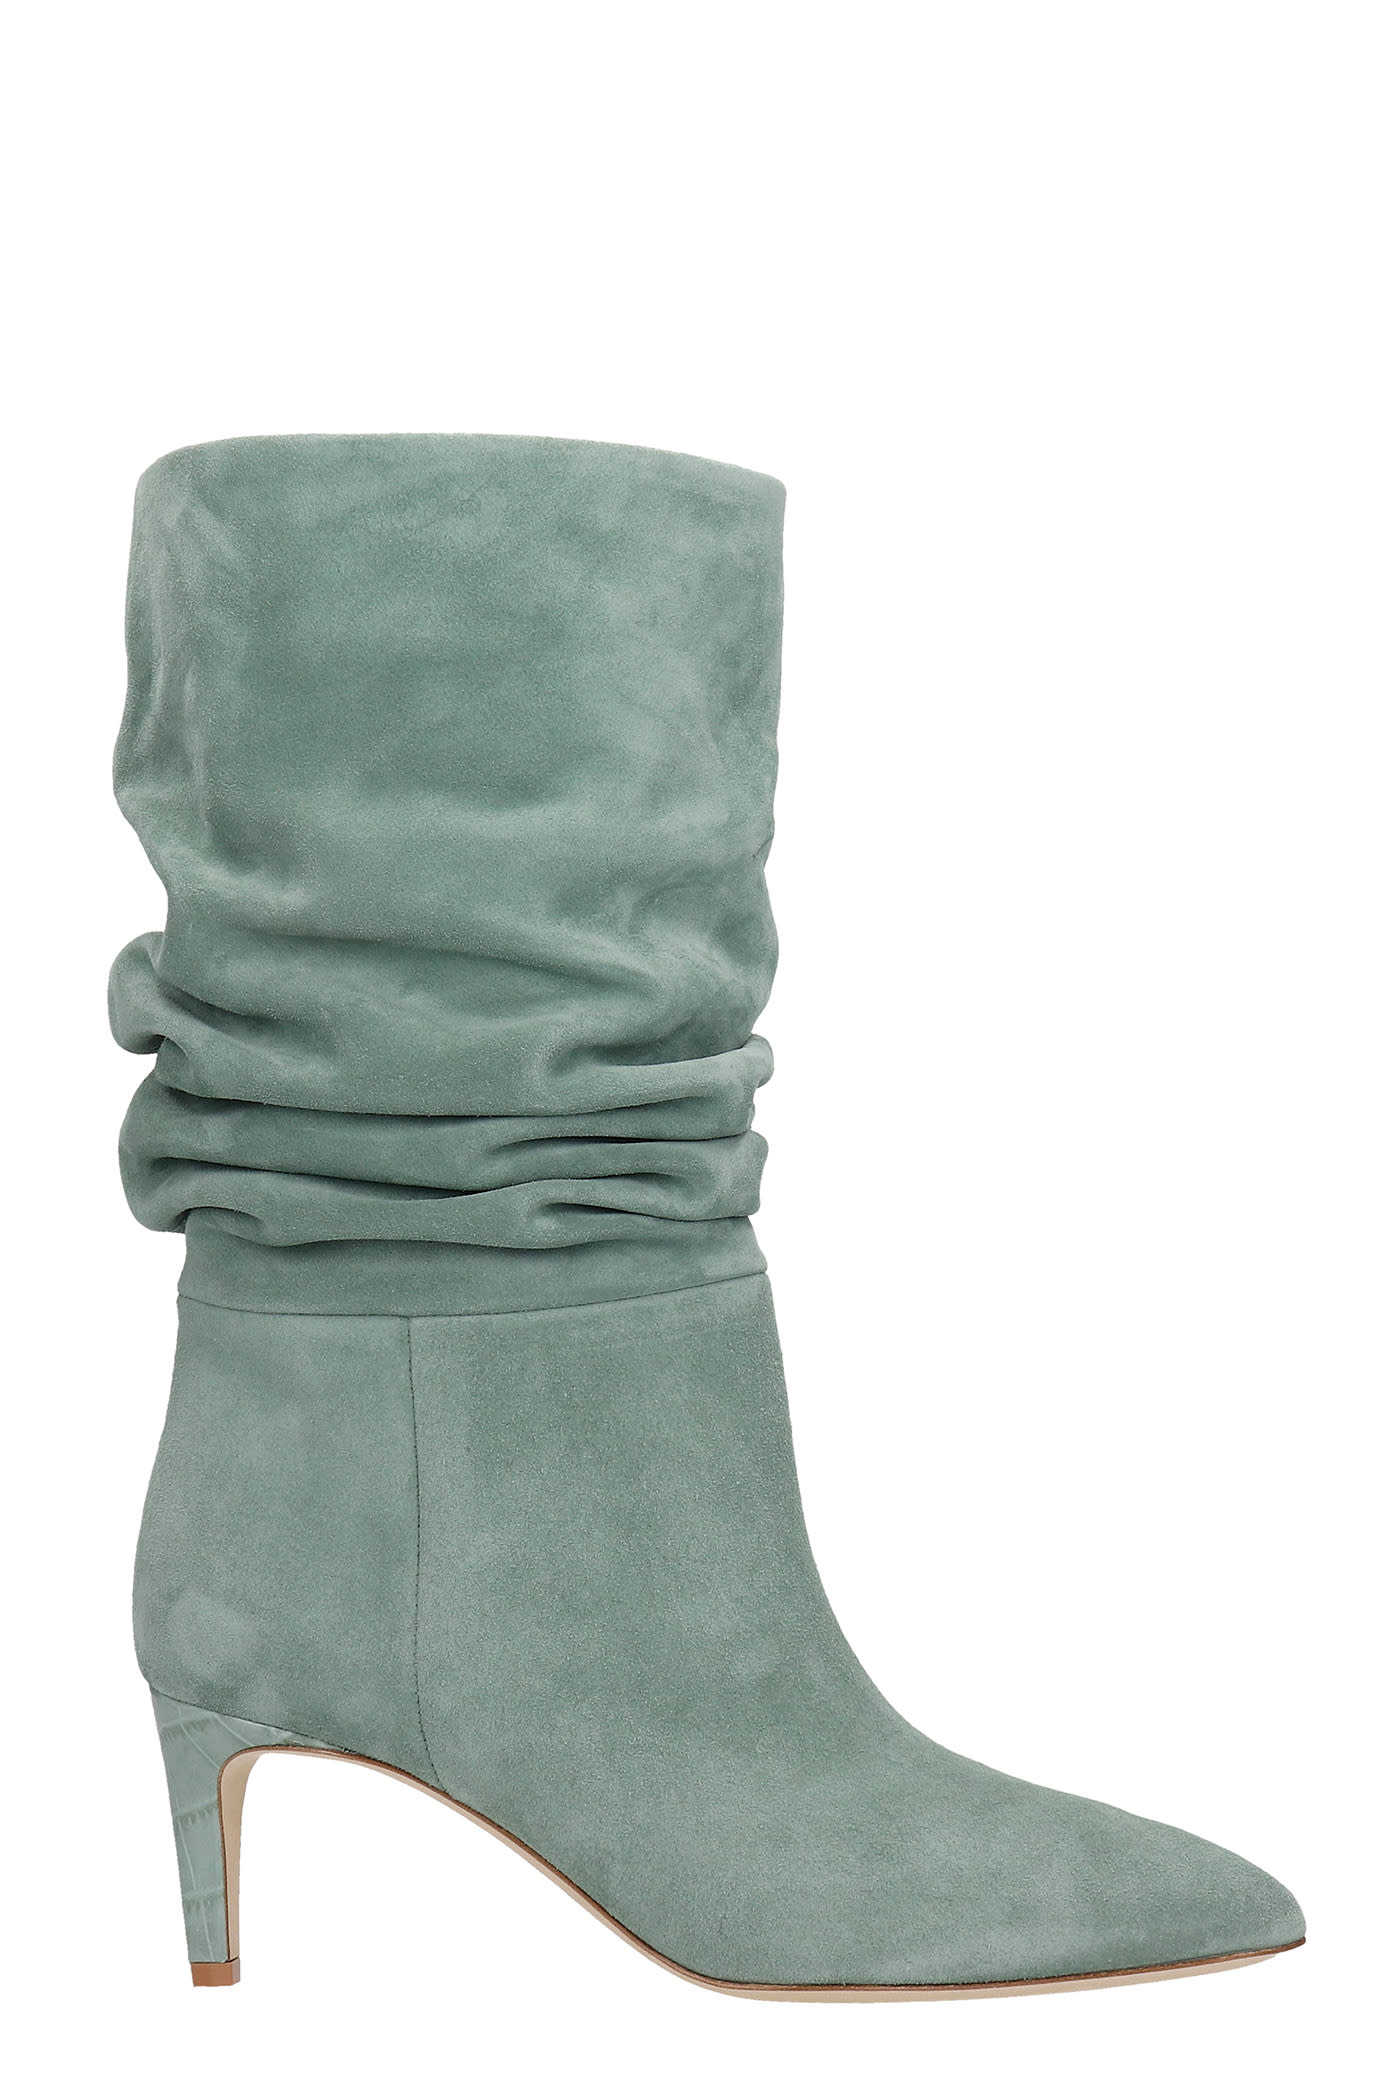 Paris Texas High Heels Ankle Boots In Green Suede